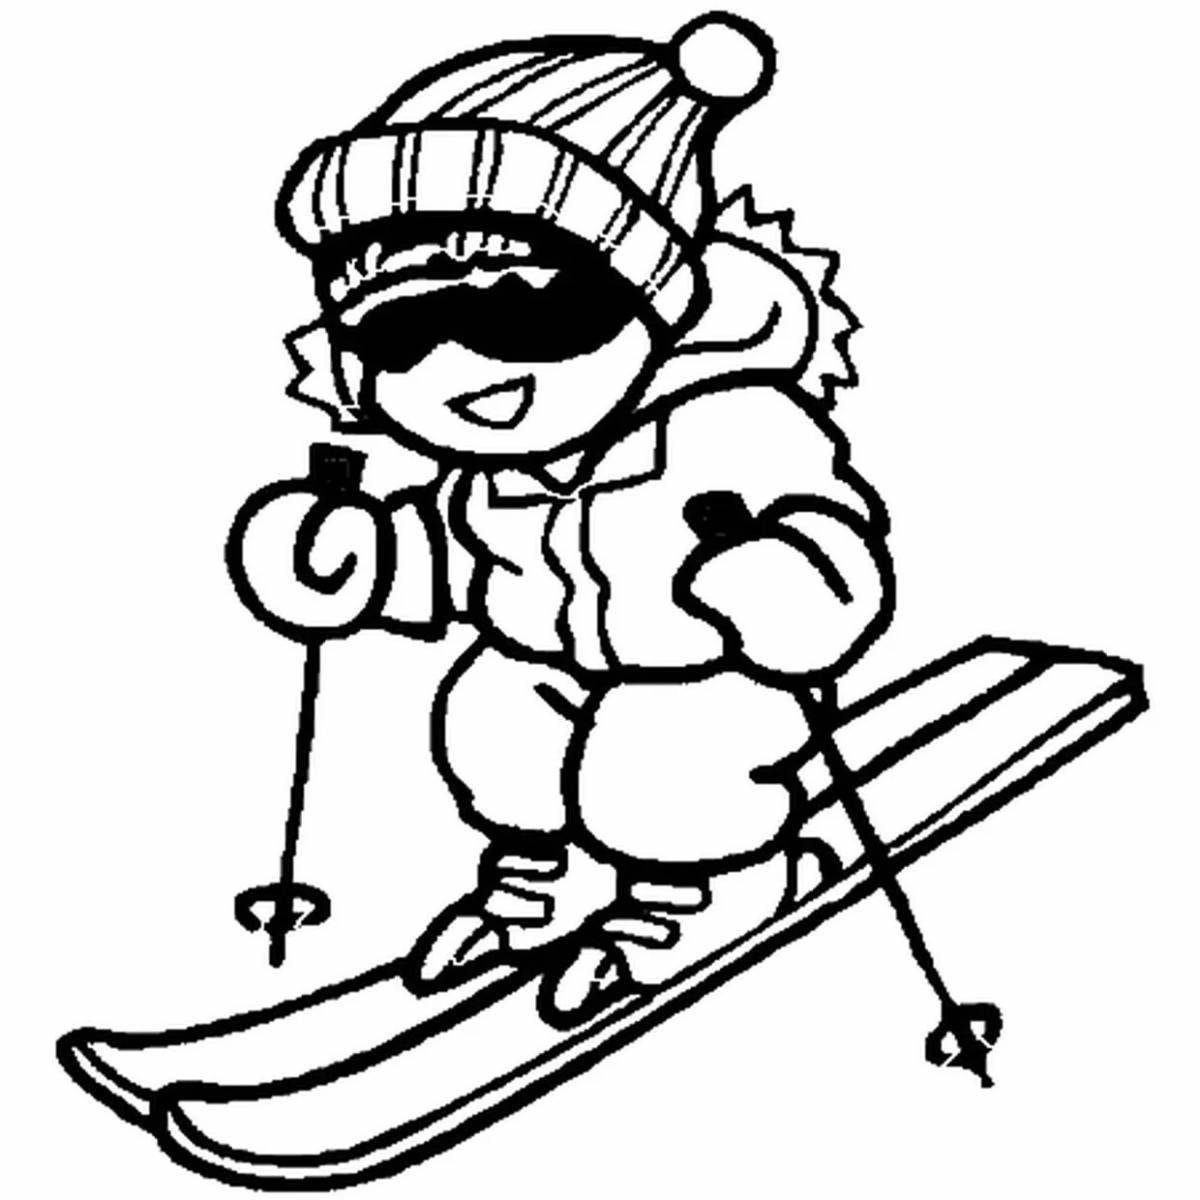 Coloring book shiny skier